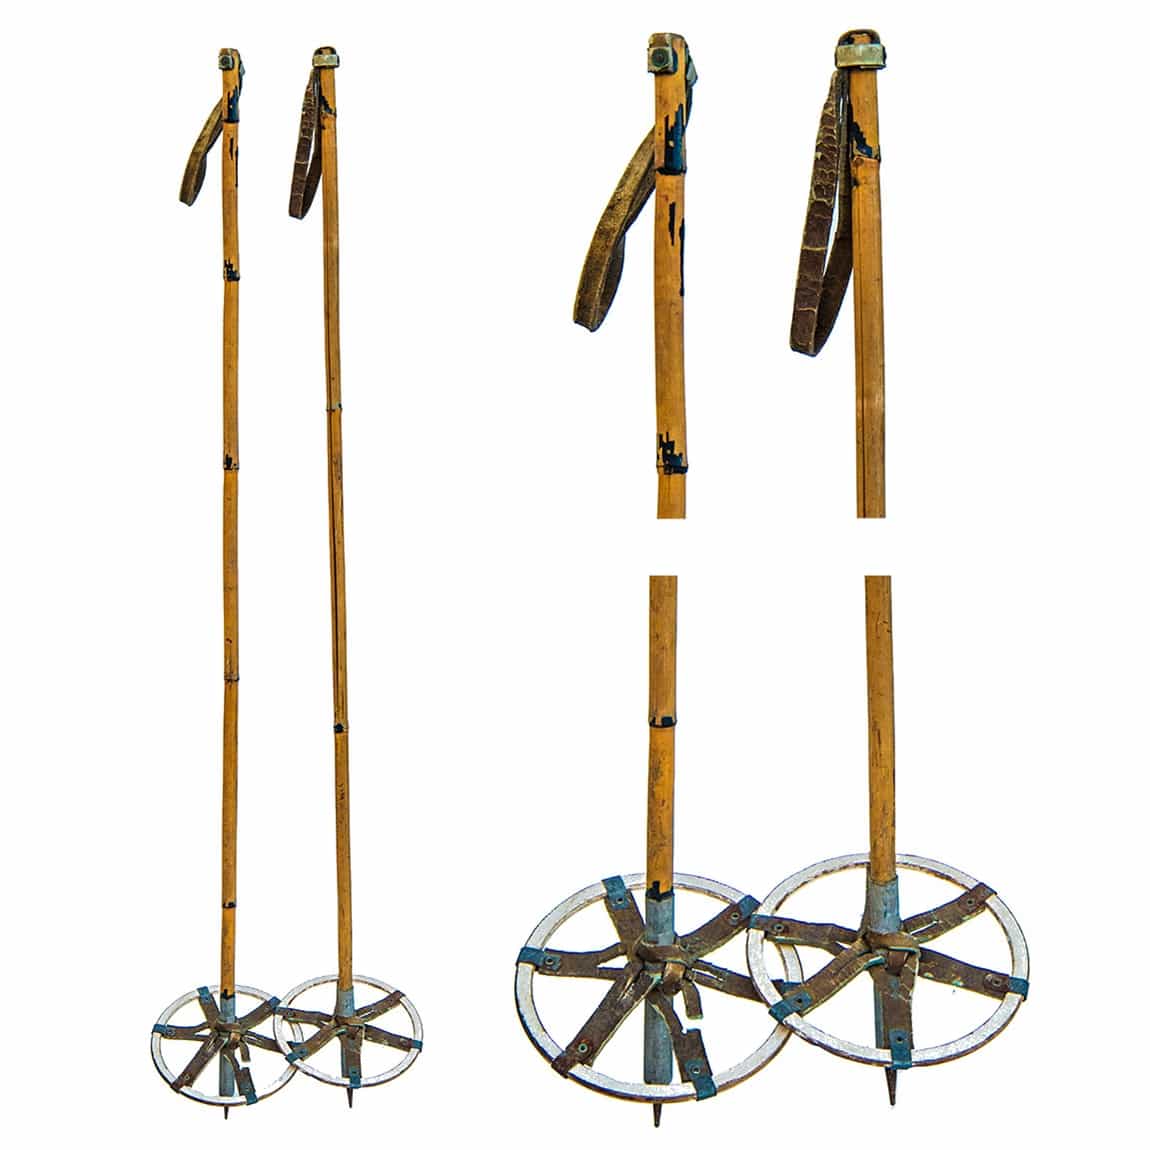 1940s Vintage Bamboo Ski Poles with White Wood Baskets and leather straps.